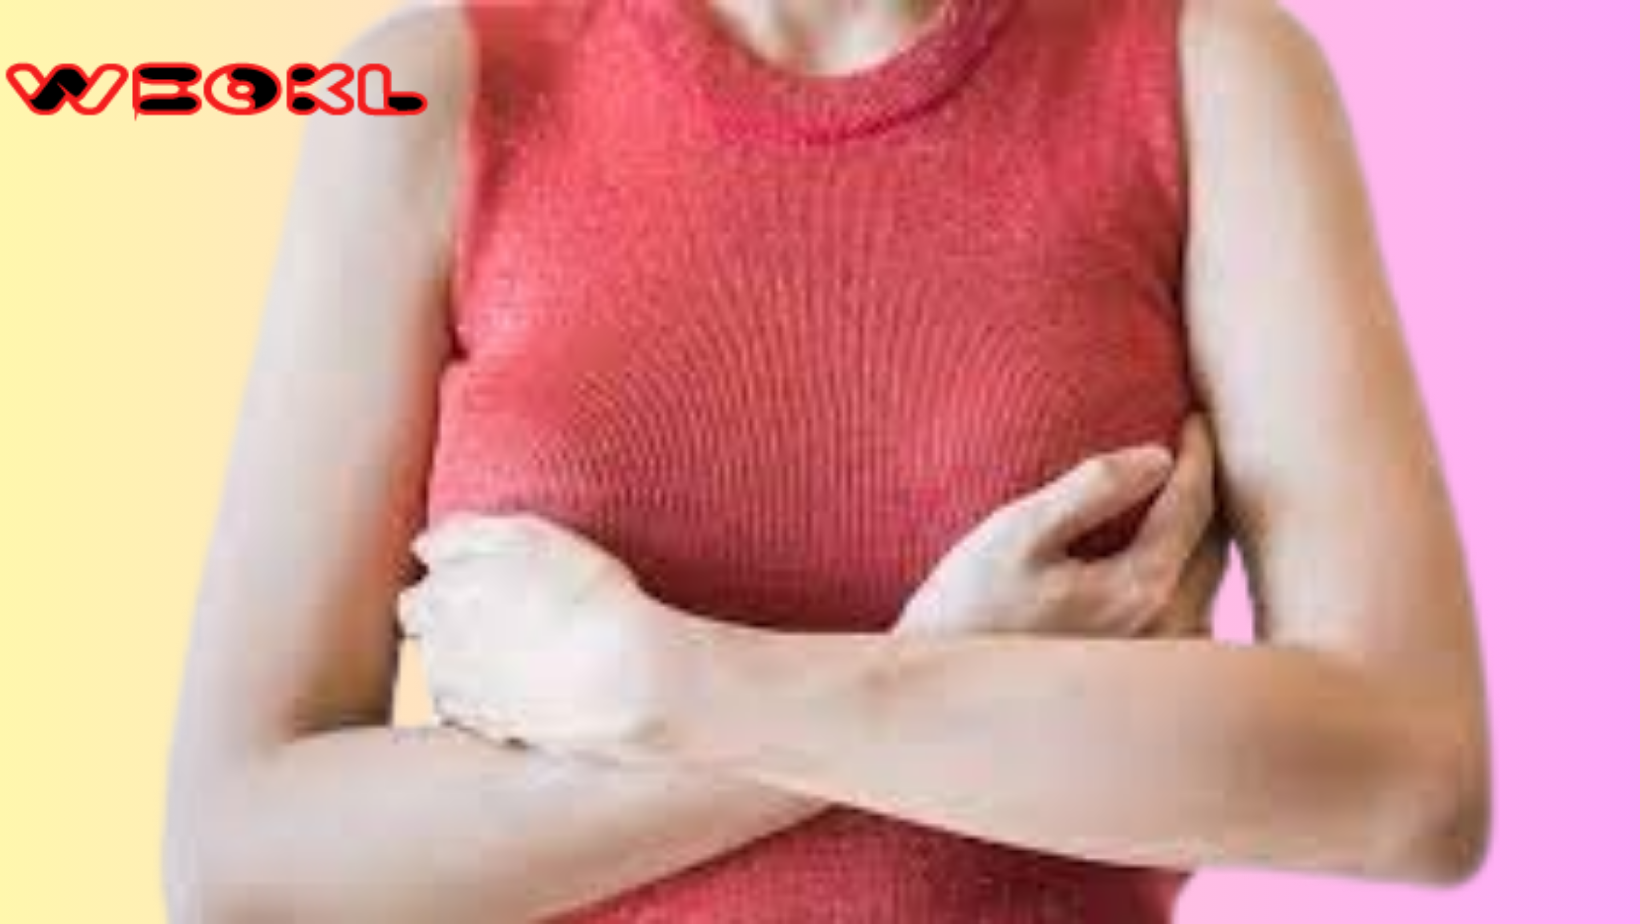 9 reasons for feeling breast pain. Breastfeeding and menstruation are the most prominent